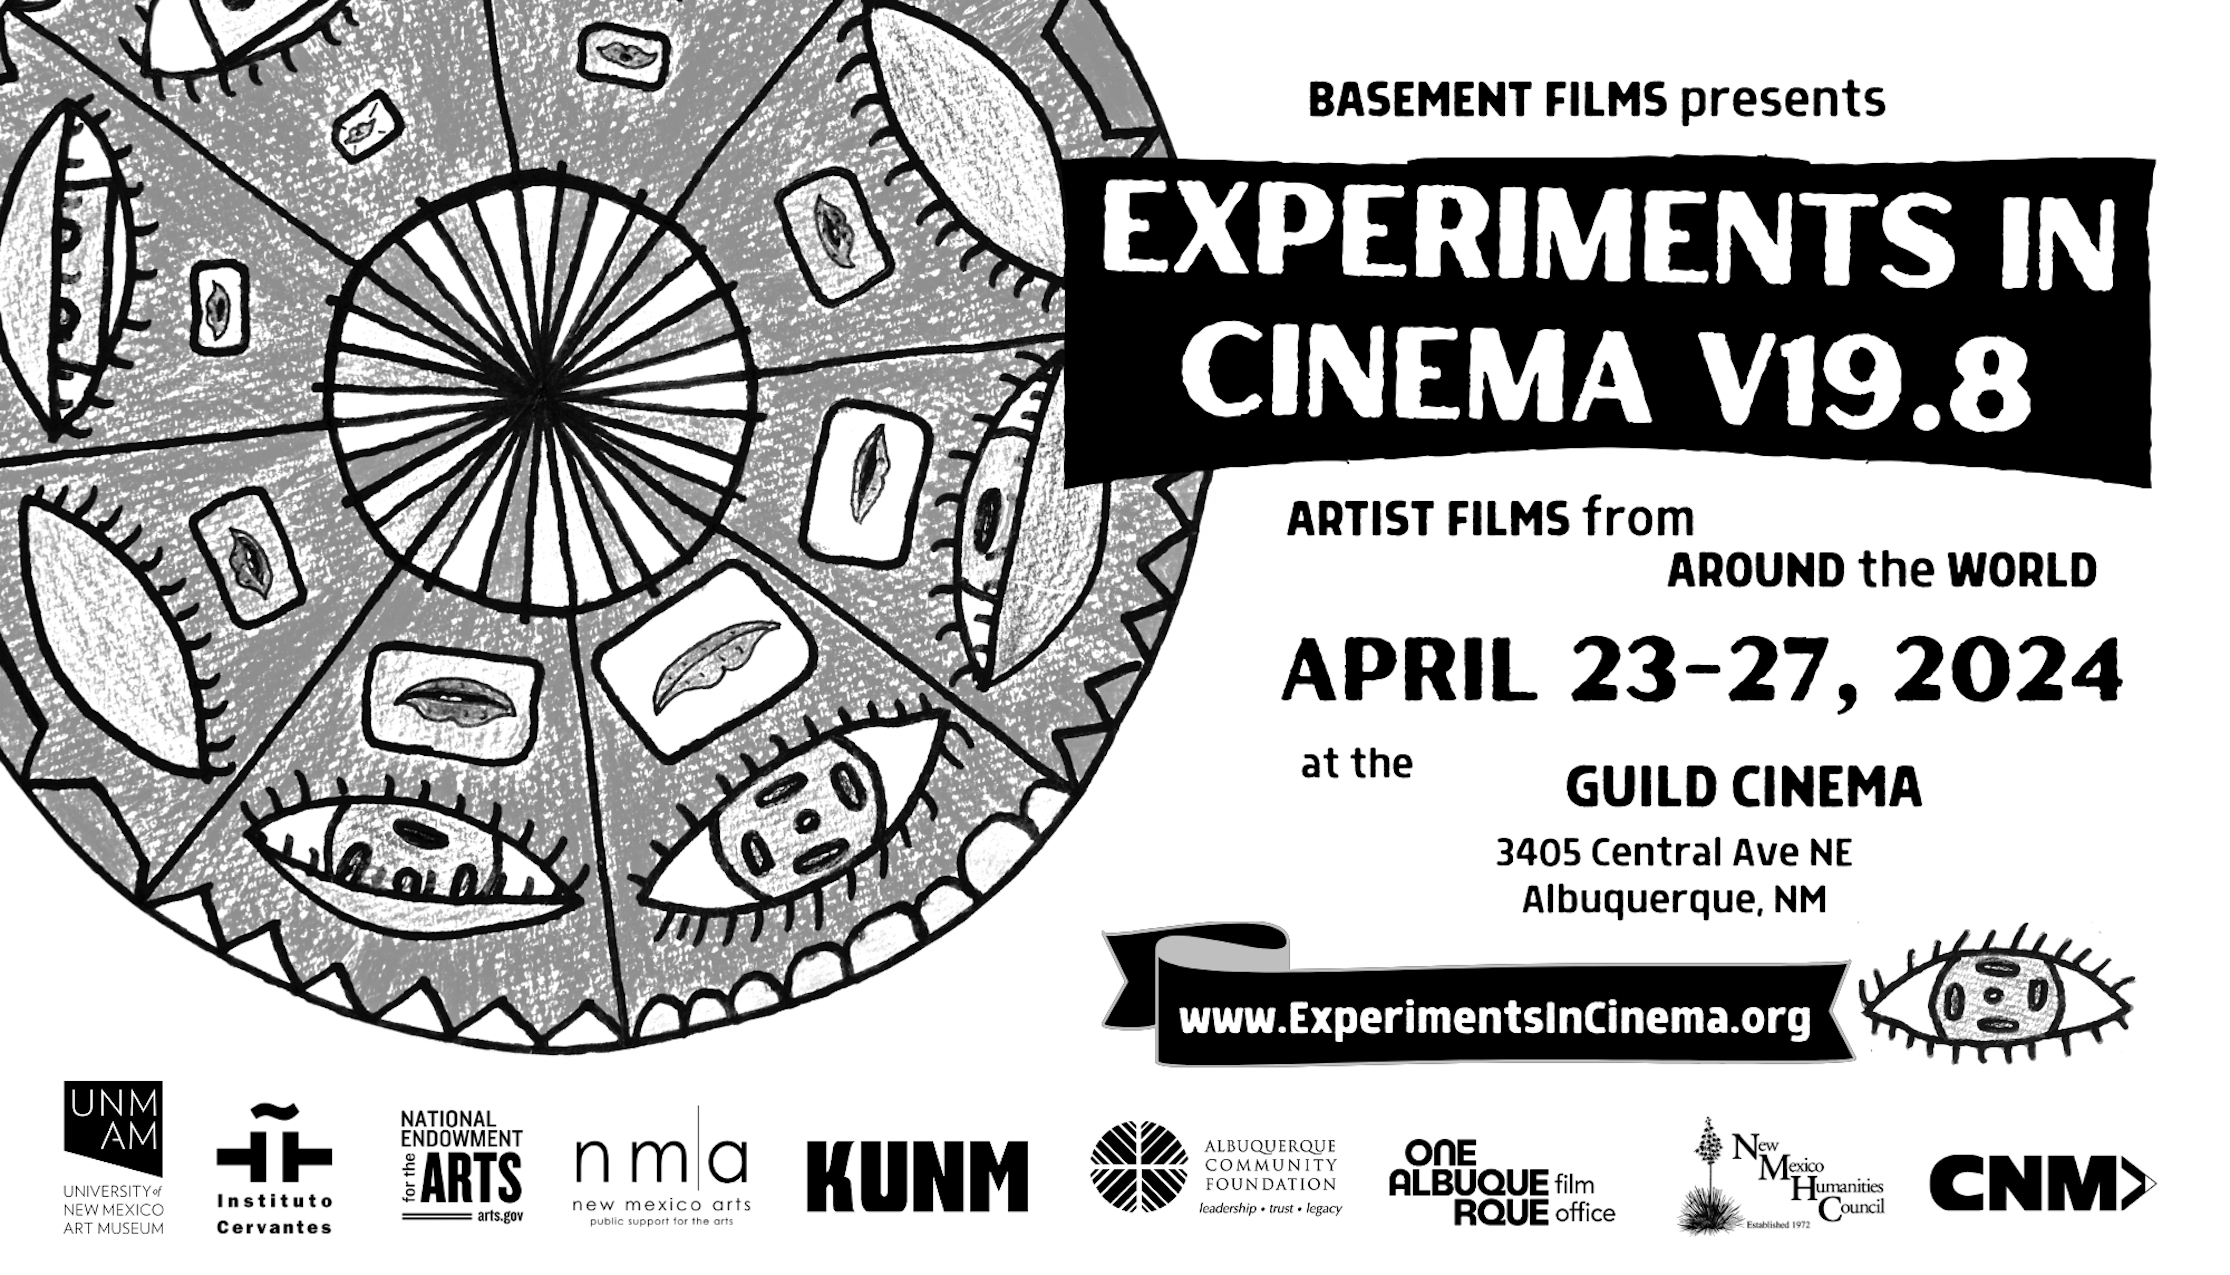 Experiments in Cinema: Soul Map of the Spanish Cinema of the Senses